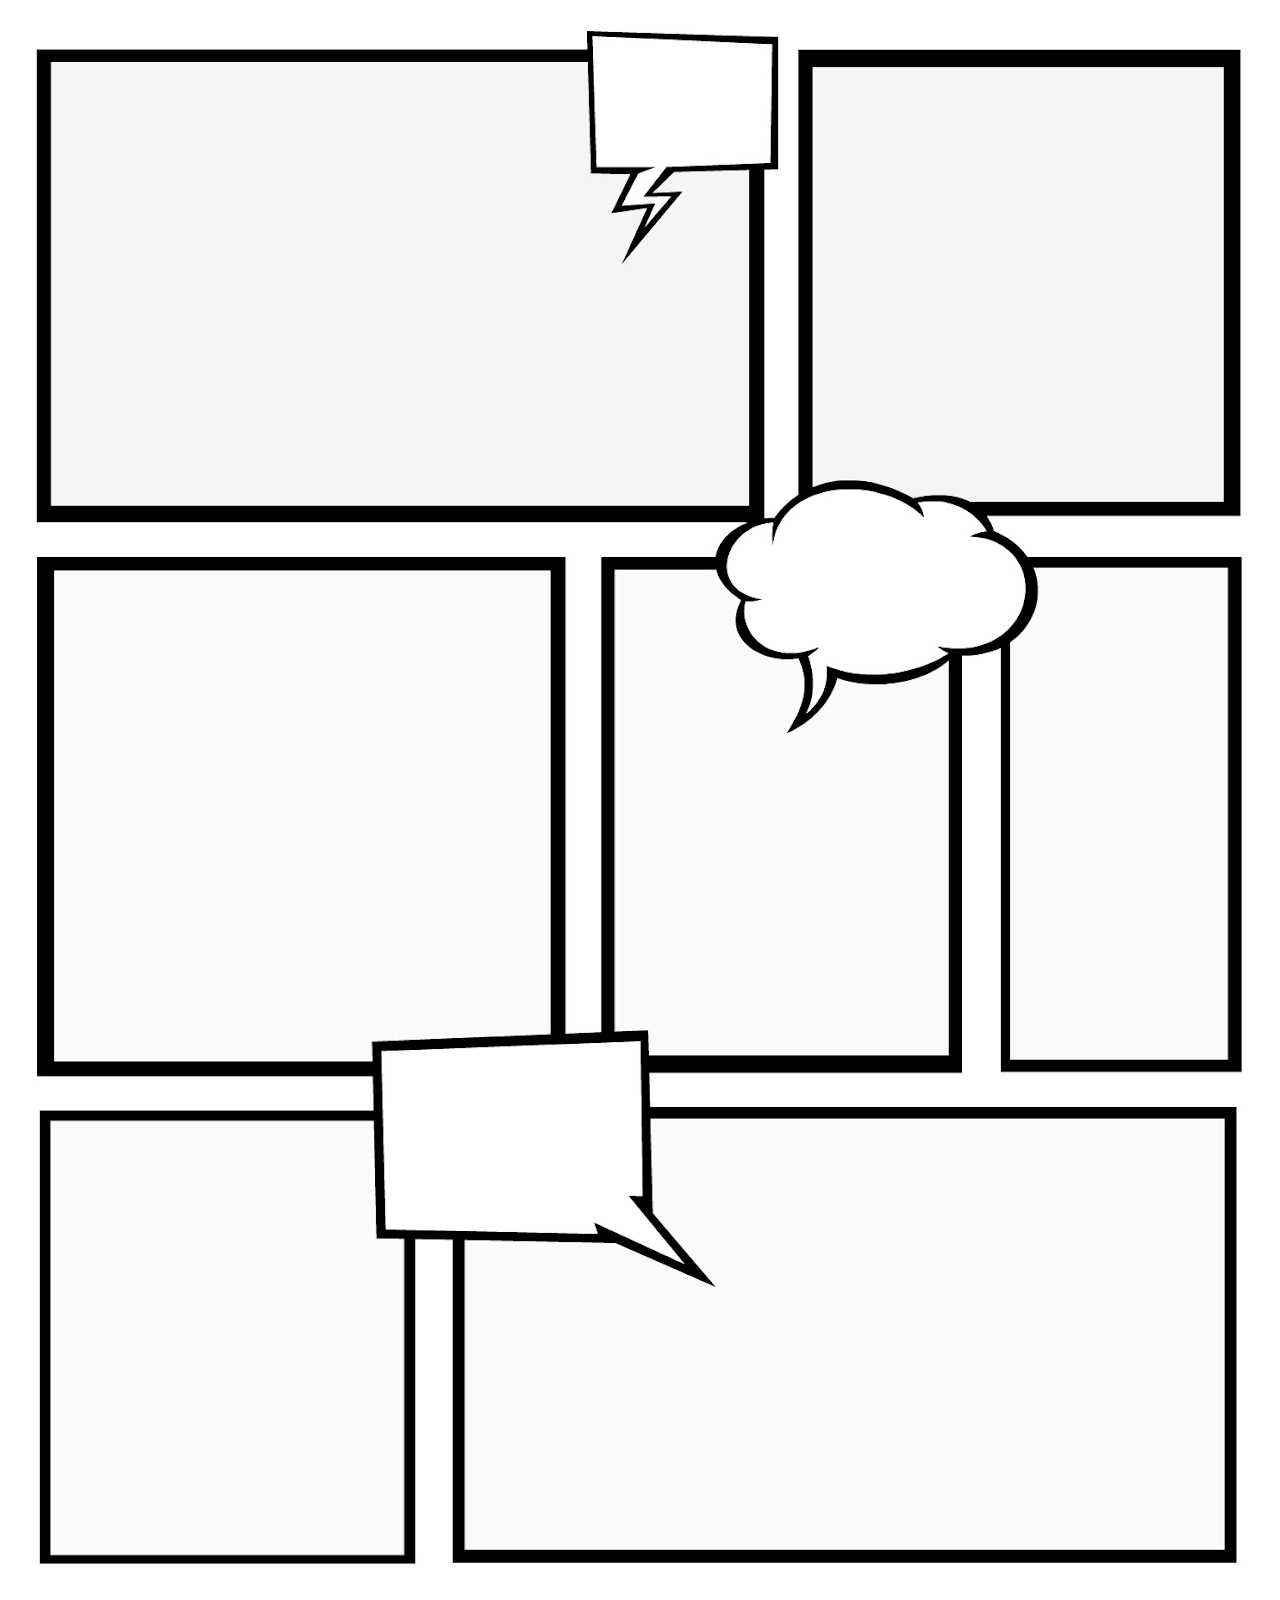 template-for-creating-your-own-comics-https-www-teachingchannel